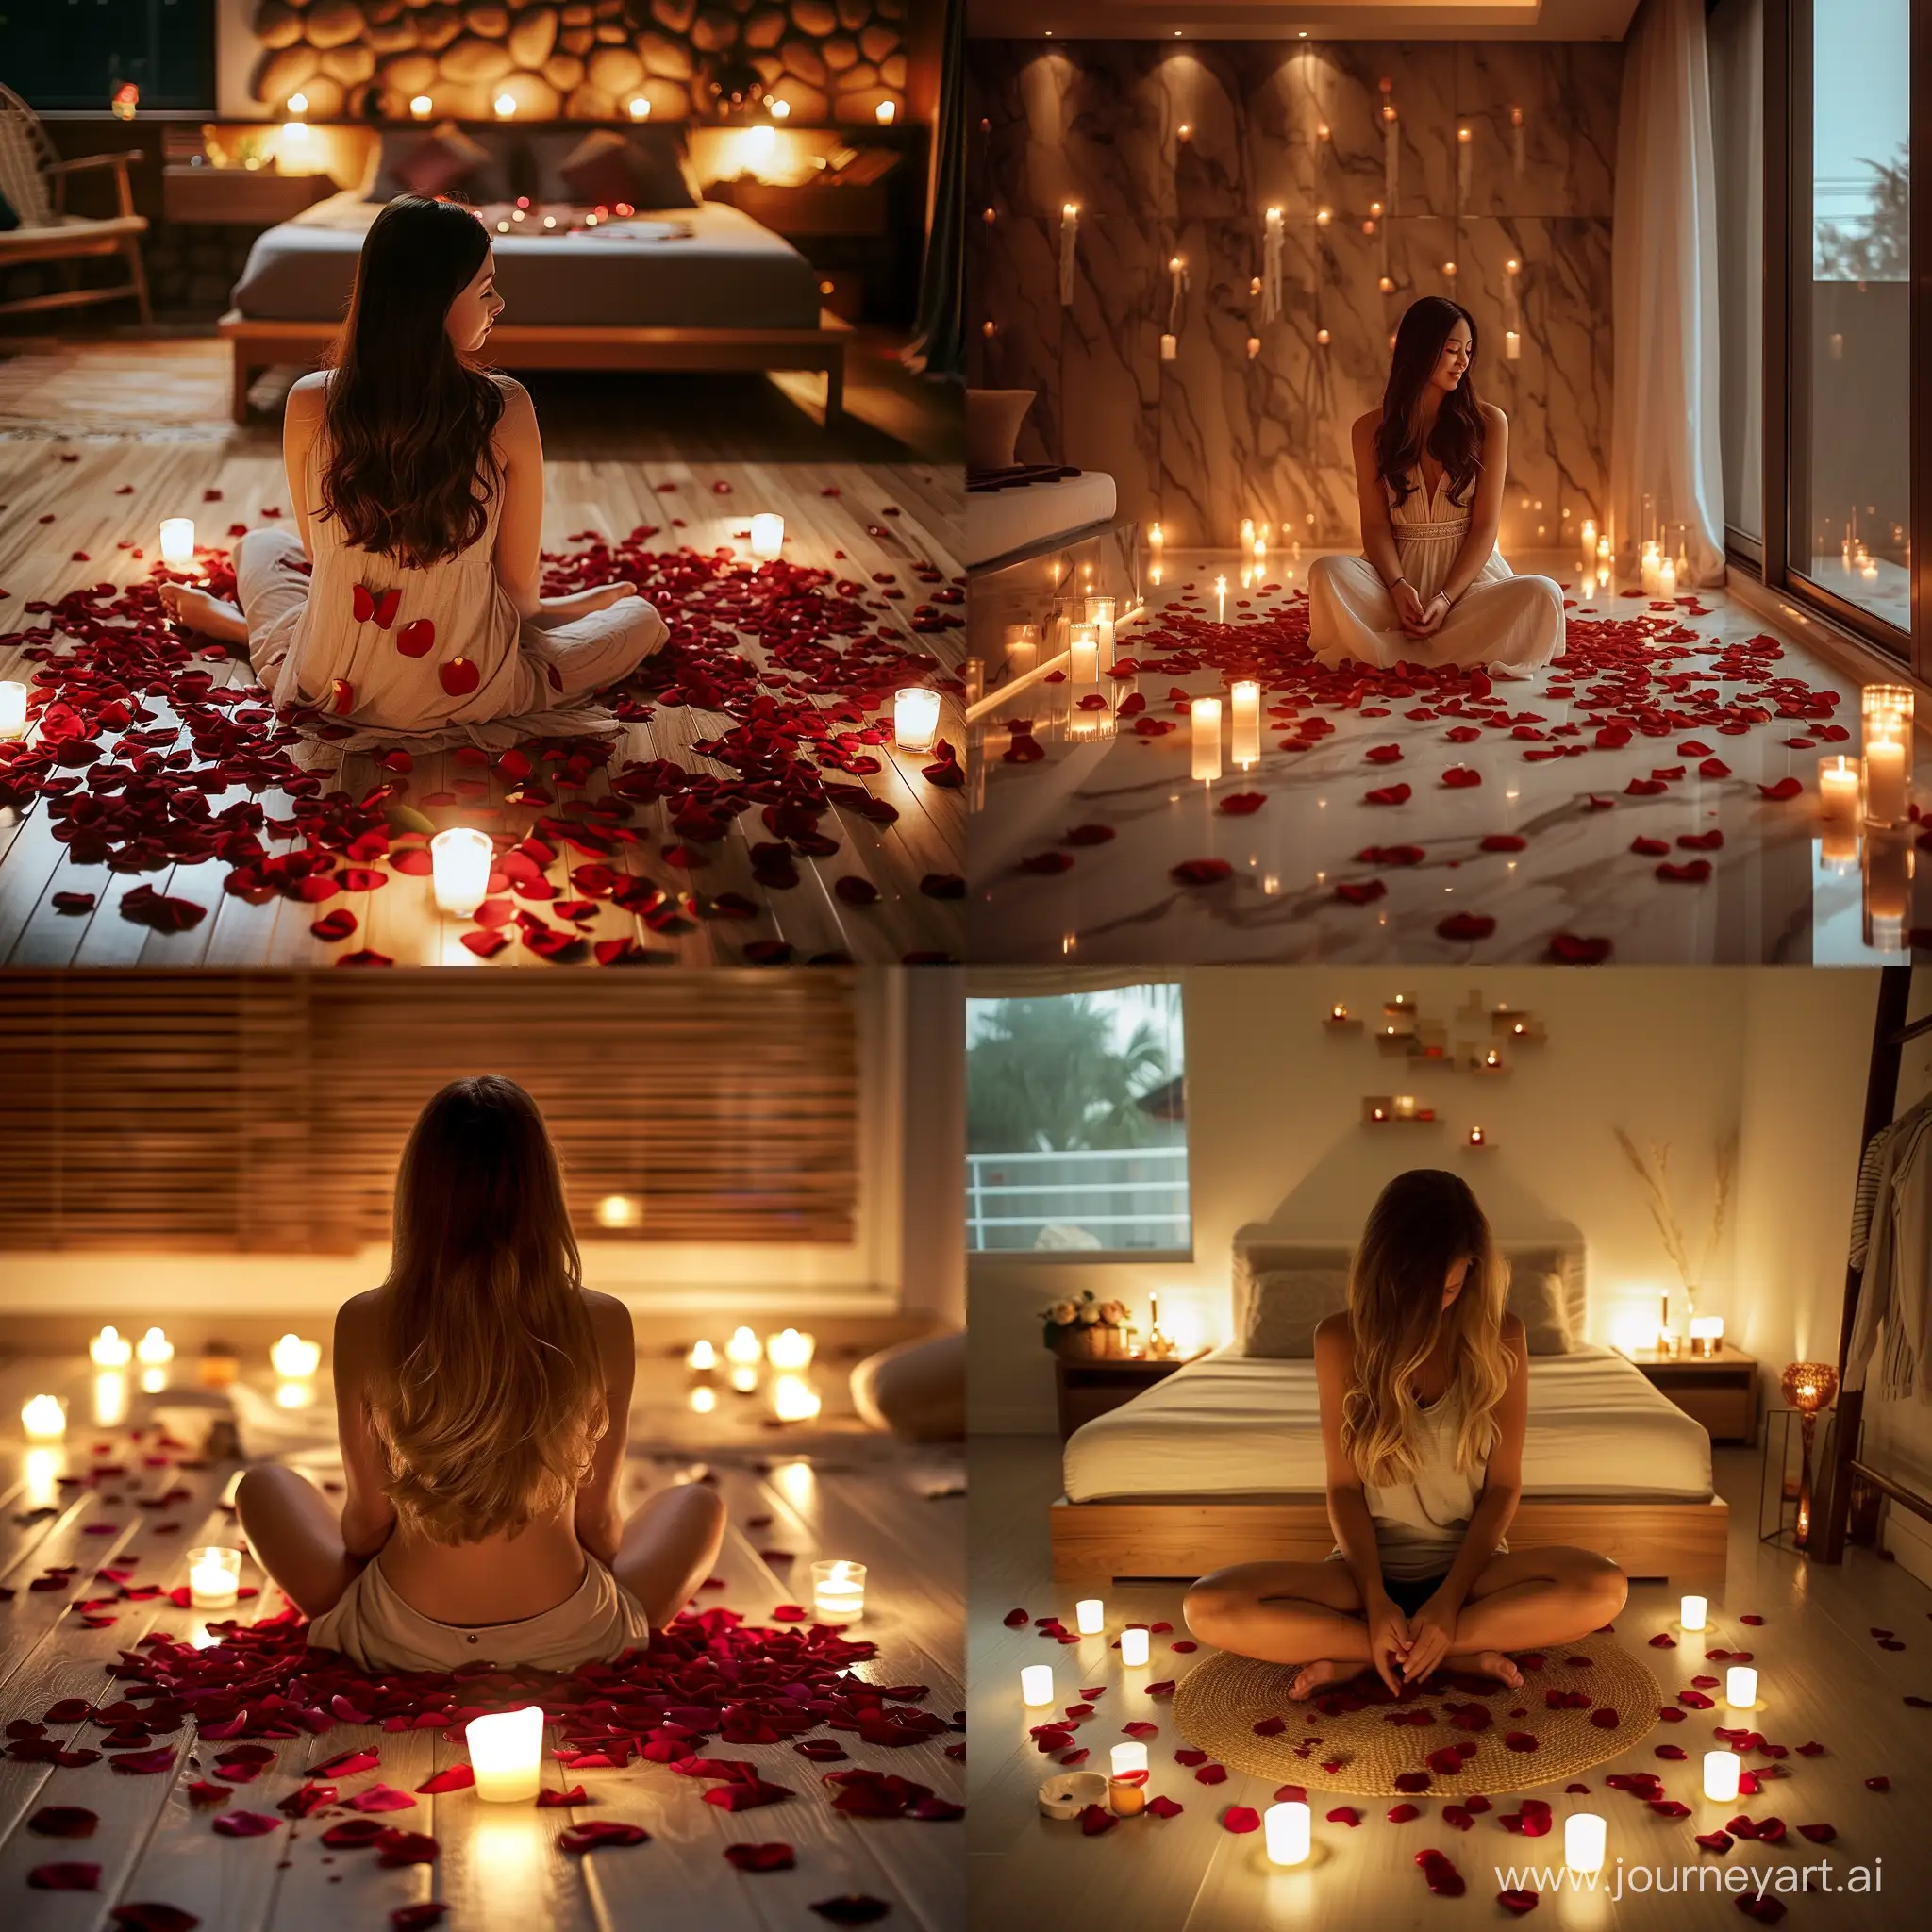 Intimate-Romantic-Setting-Girl-Surrounded-by-Rose-Petals-and-Candlelight